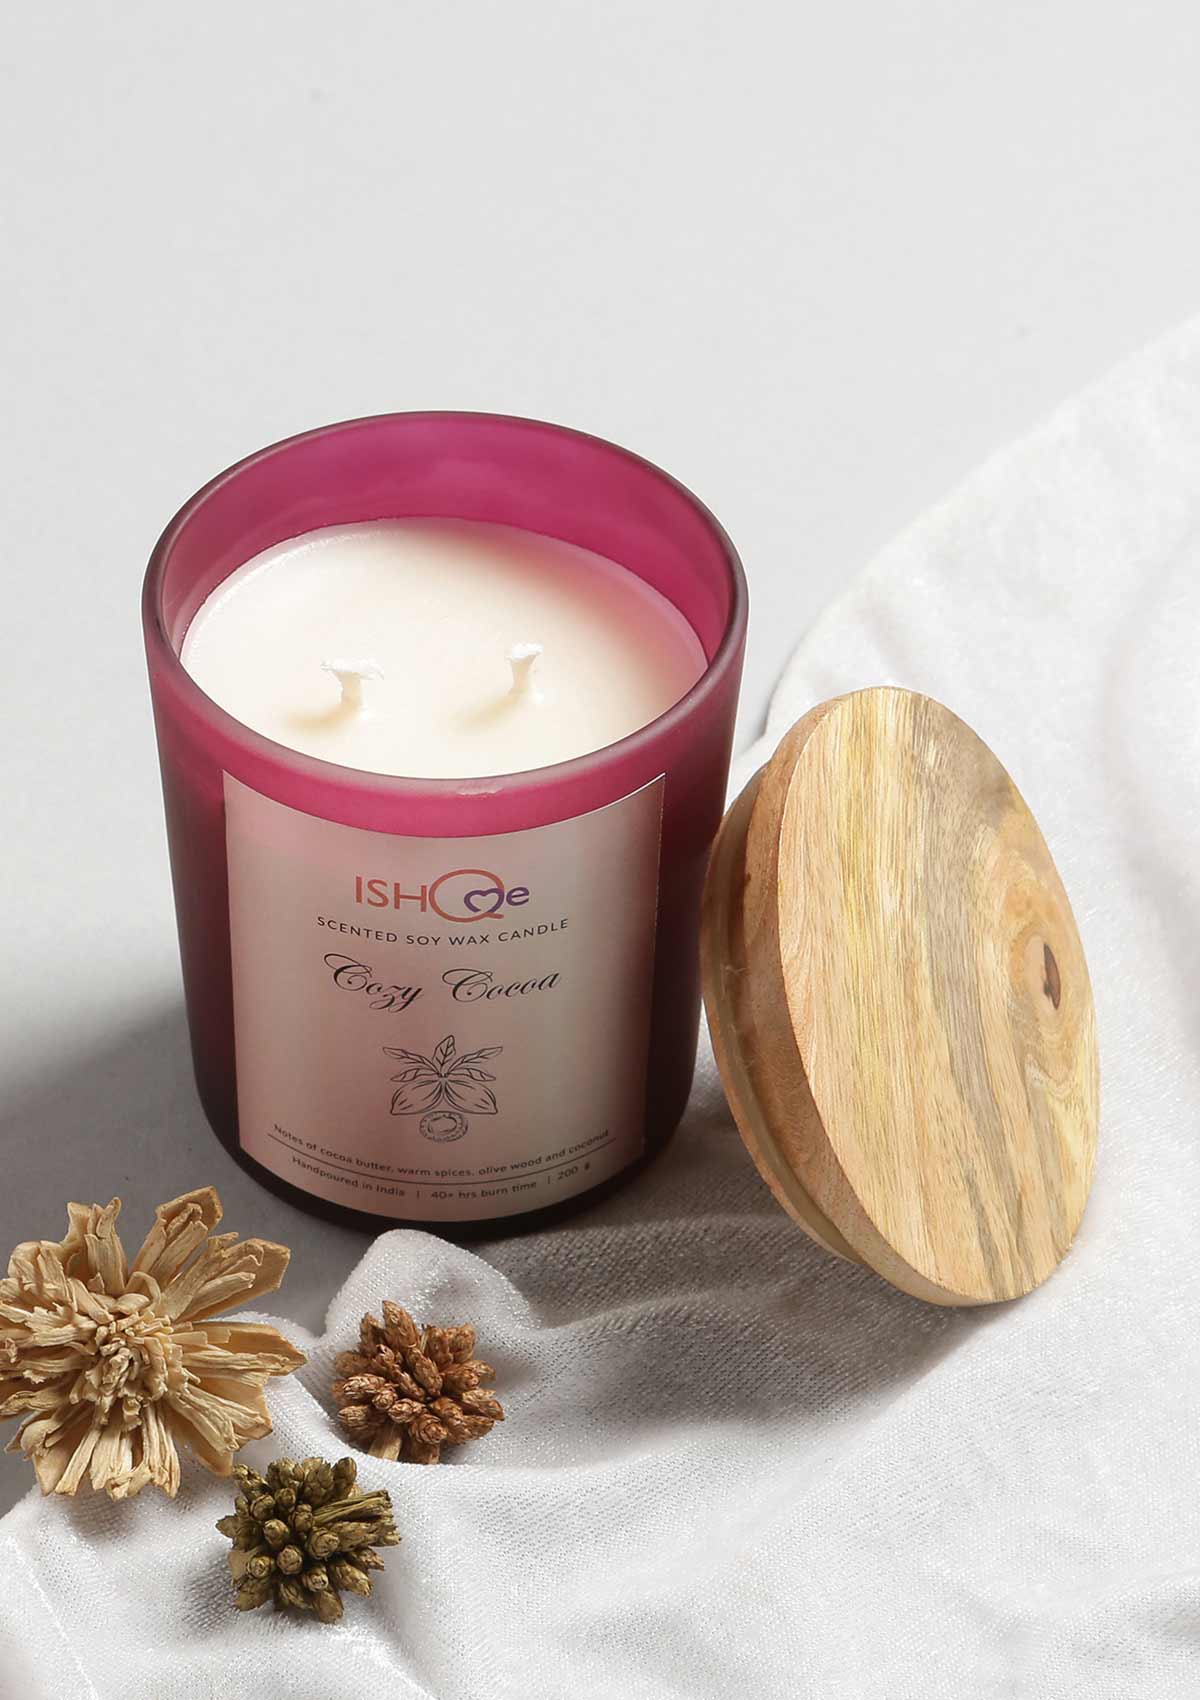 Scented Soy Wax Candle - Cozy Cocoa